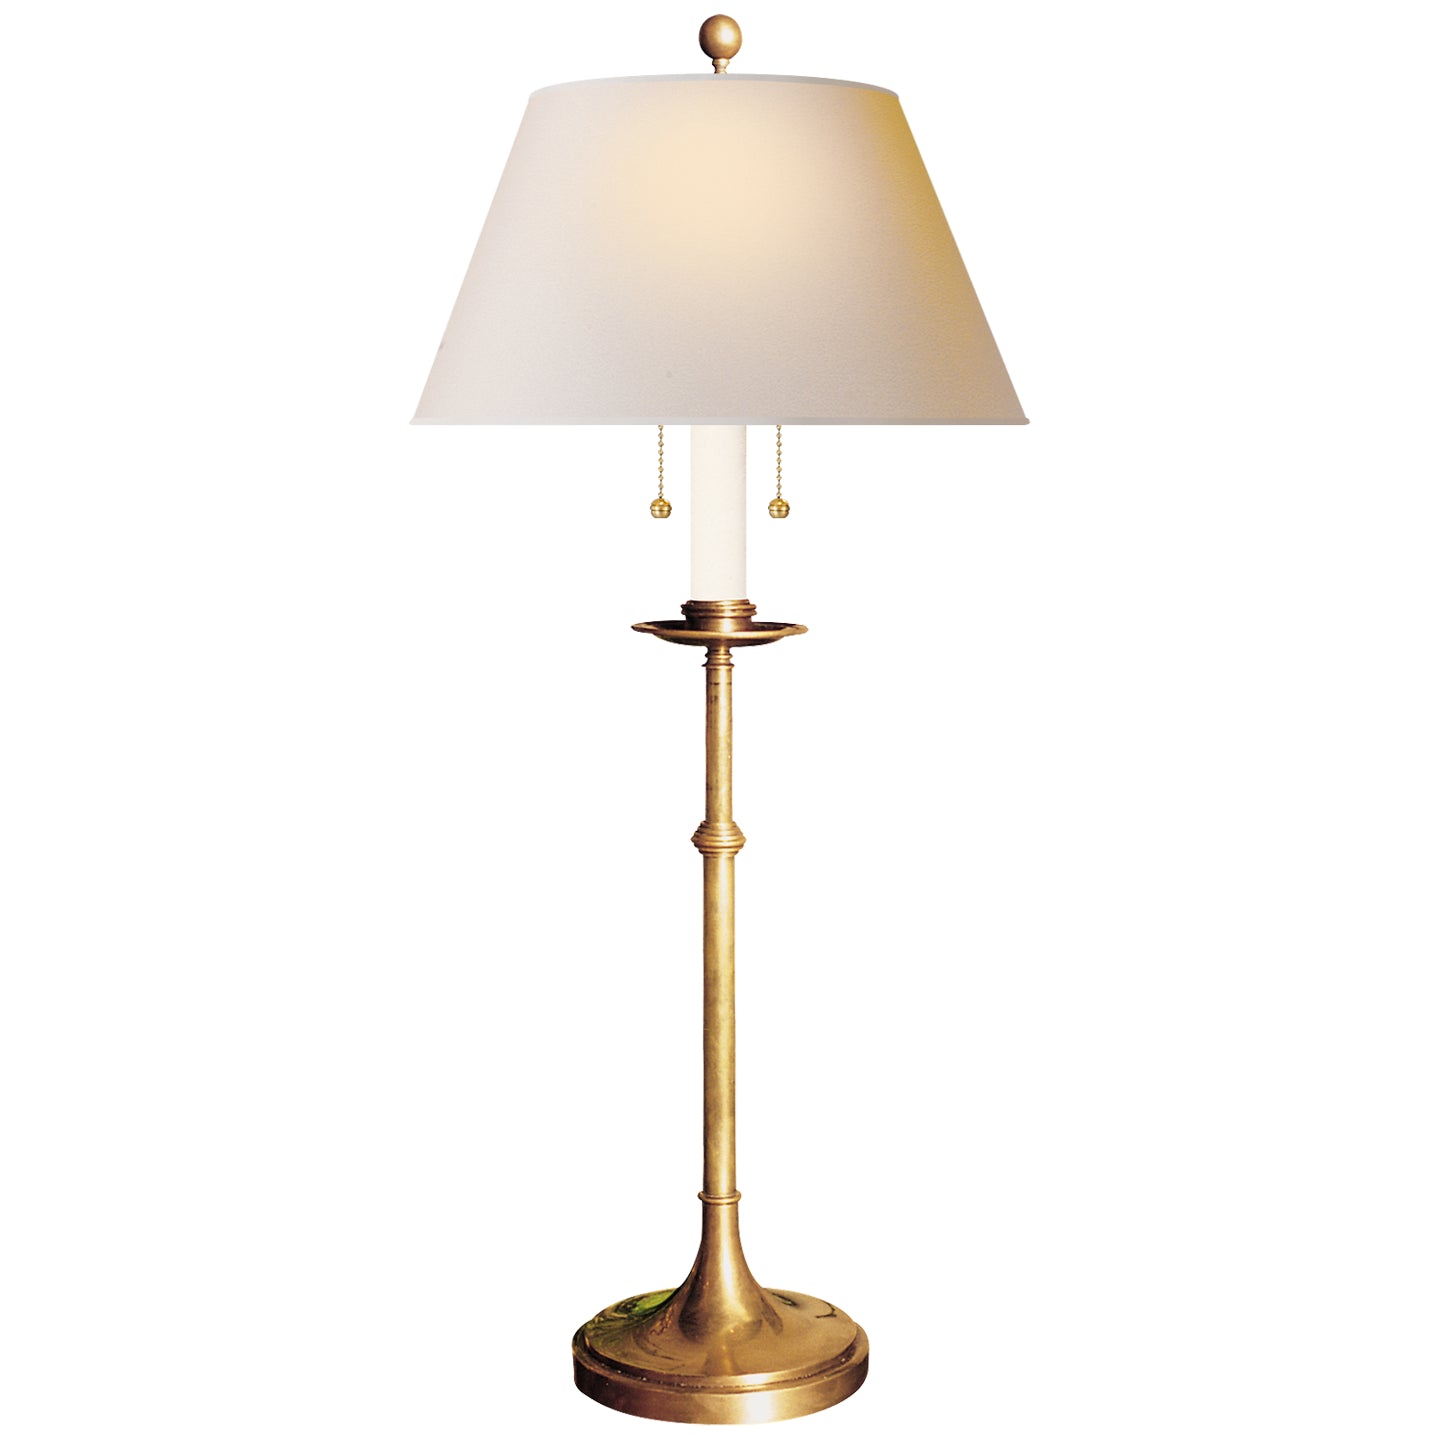 Load image into Gallery viewer, Visual Comfort Signature - CHA 8188AB-NP - Two Light Table Lamp - Dorchester - Antique-Burnished Brass
